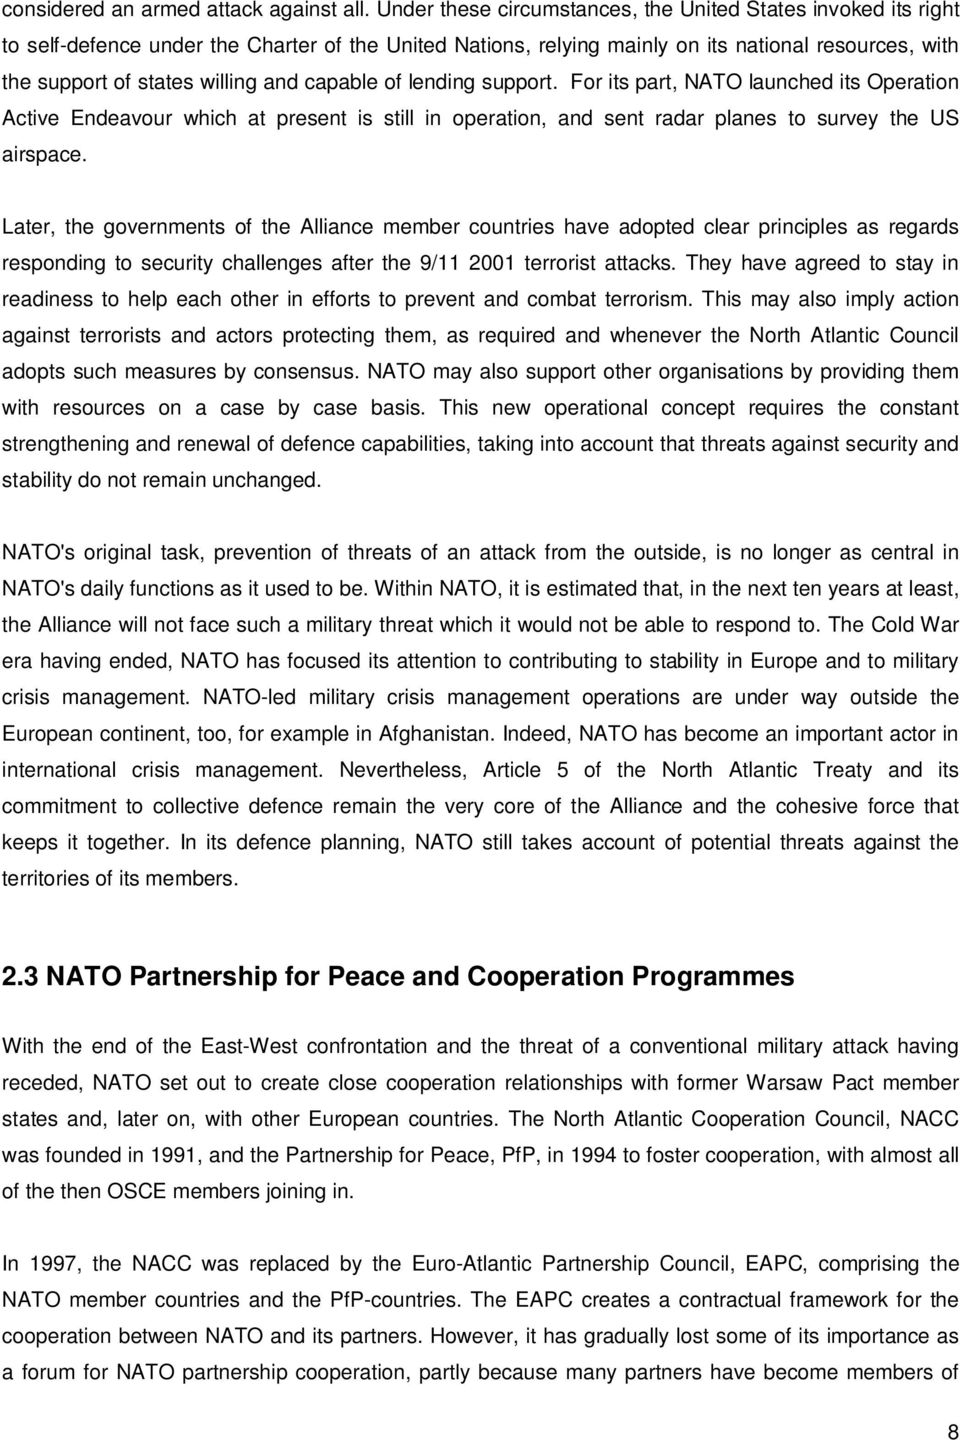 and capable of lending support. For its part, NATO launched its Operation Active Endeavour which at present is still in operation, and sent radar planes to survey the US airspace.